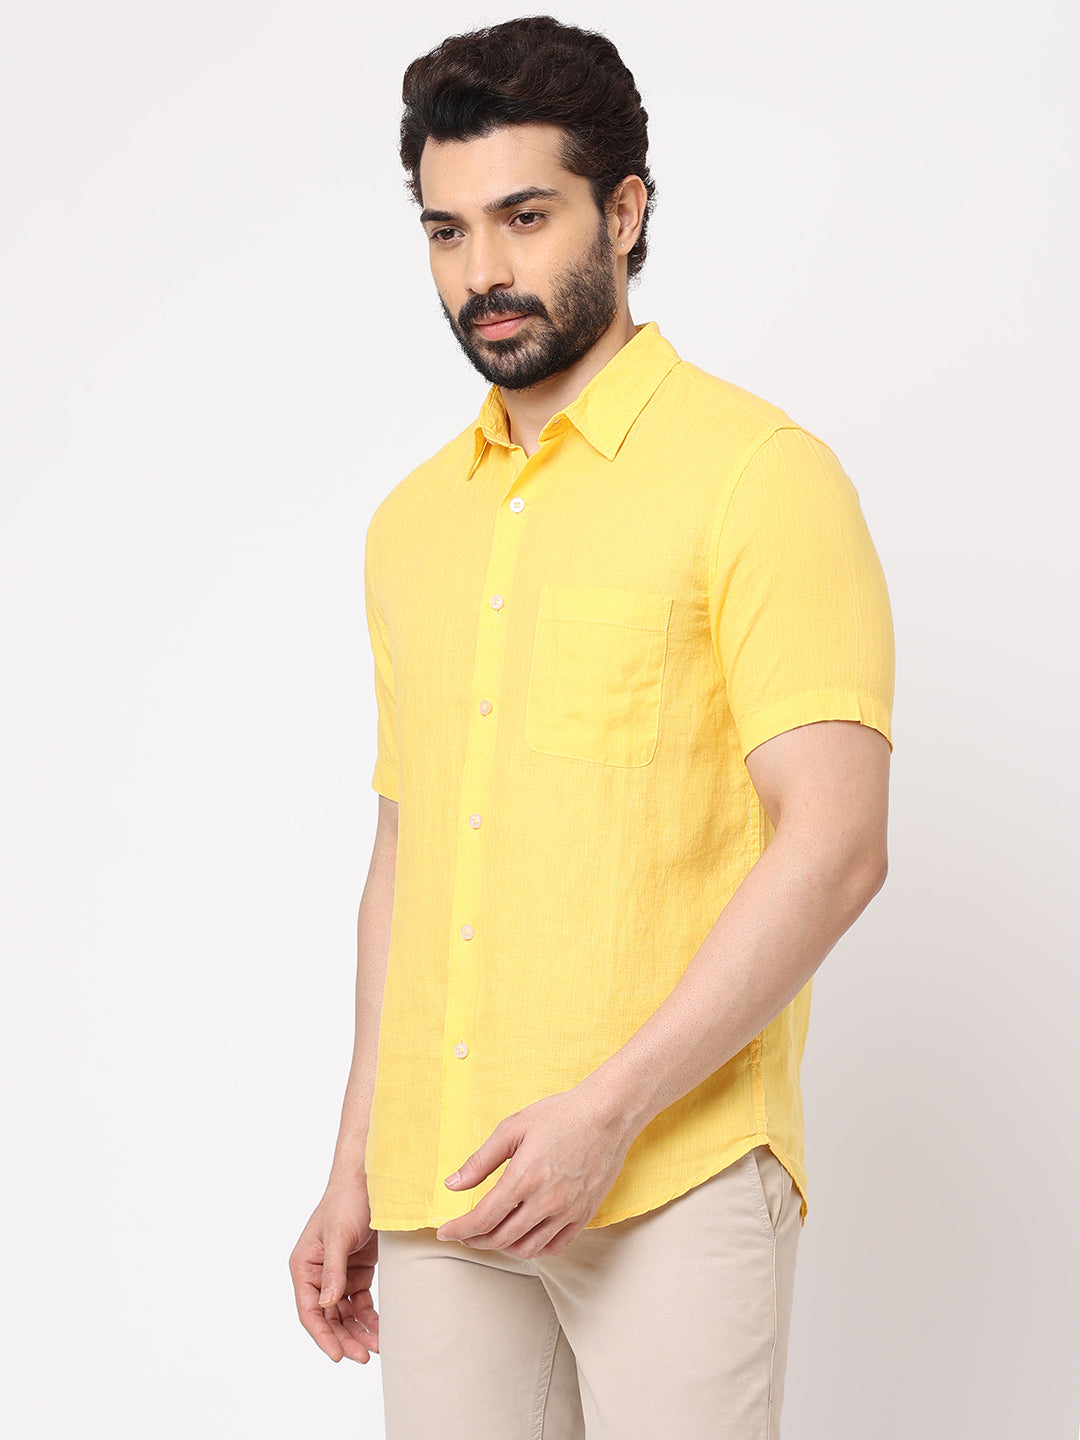 English Navy Men Solid Formal Yellow Shirt - Buy English Navy Men Solid  Formal Yellow Shirt Online at Best Prices in India | Flipkart.com